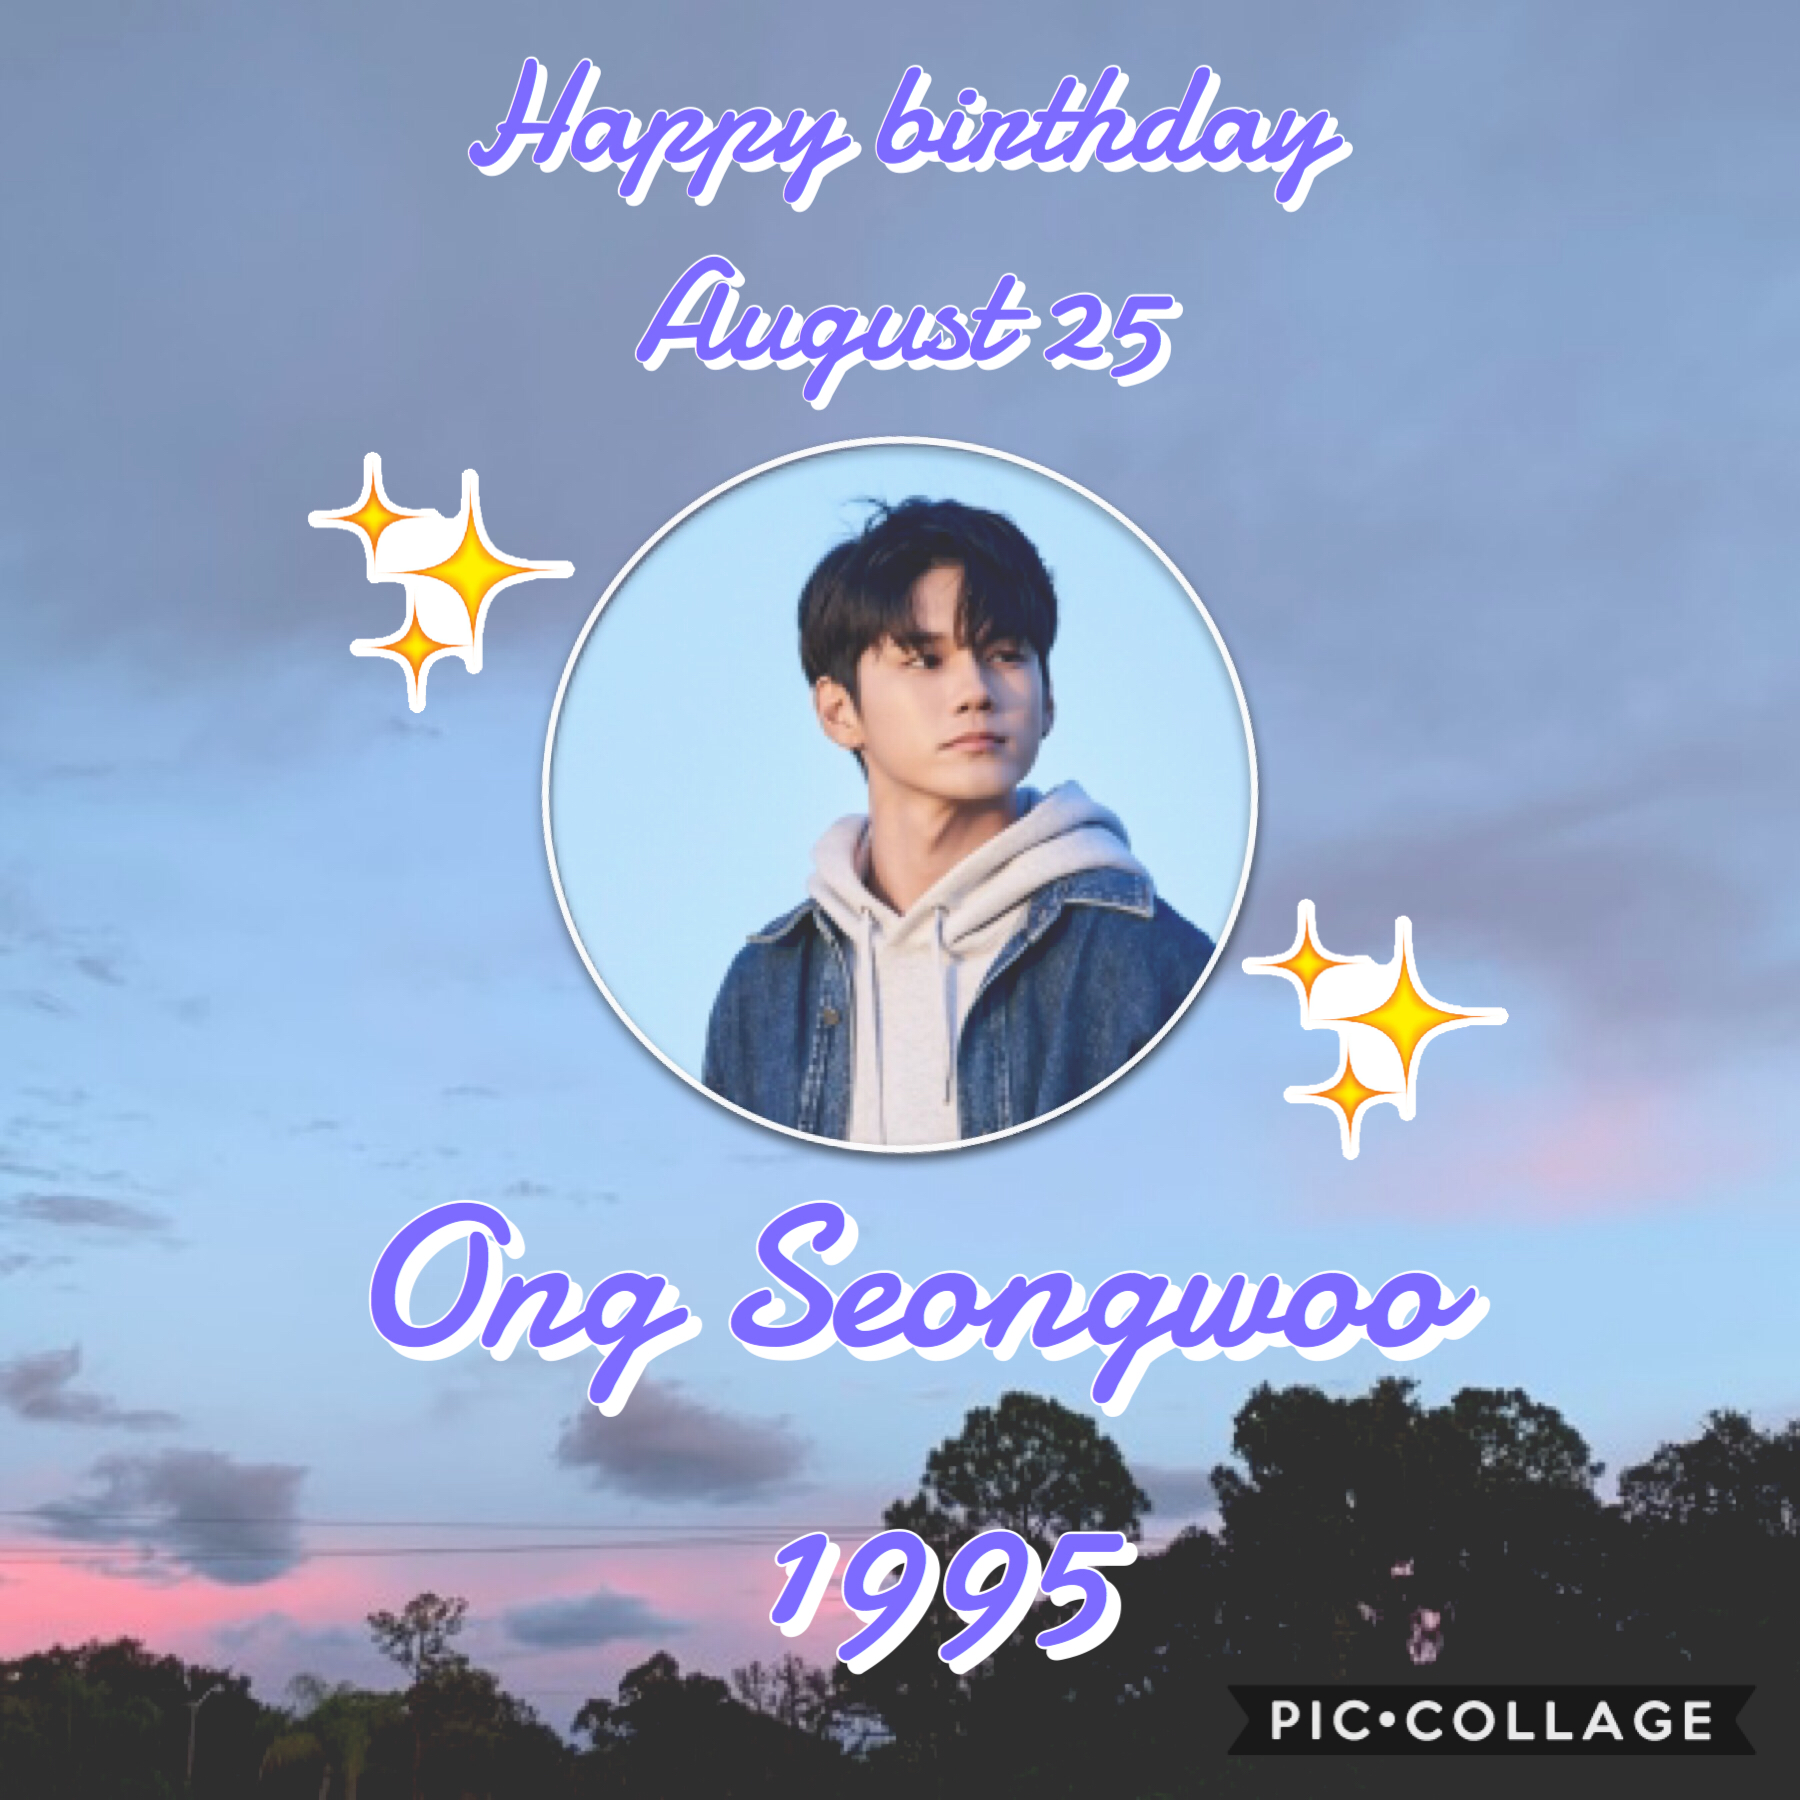 •🌻🍃•
Happy birthday!! Imagine being handsome, adorable, talented, and funny🥺🥺 oh wait that’s Seongwoo. Listen to his songs!!❤️
Other birthdays:
•DAY6’s Dowoon~ Aug. 25
🌻🍃~Whoop~🍃🌻